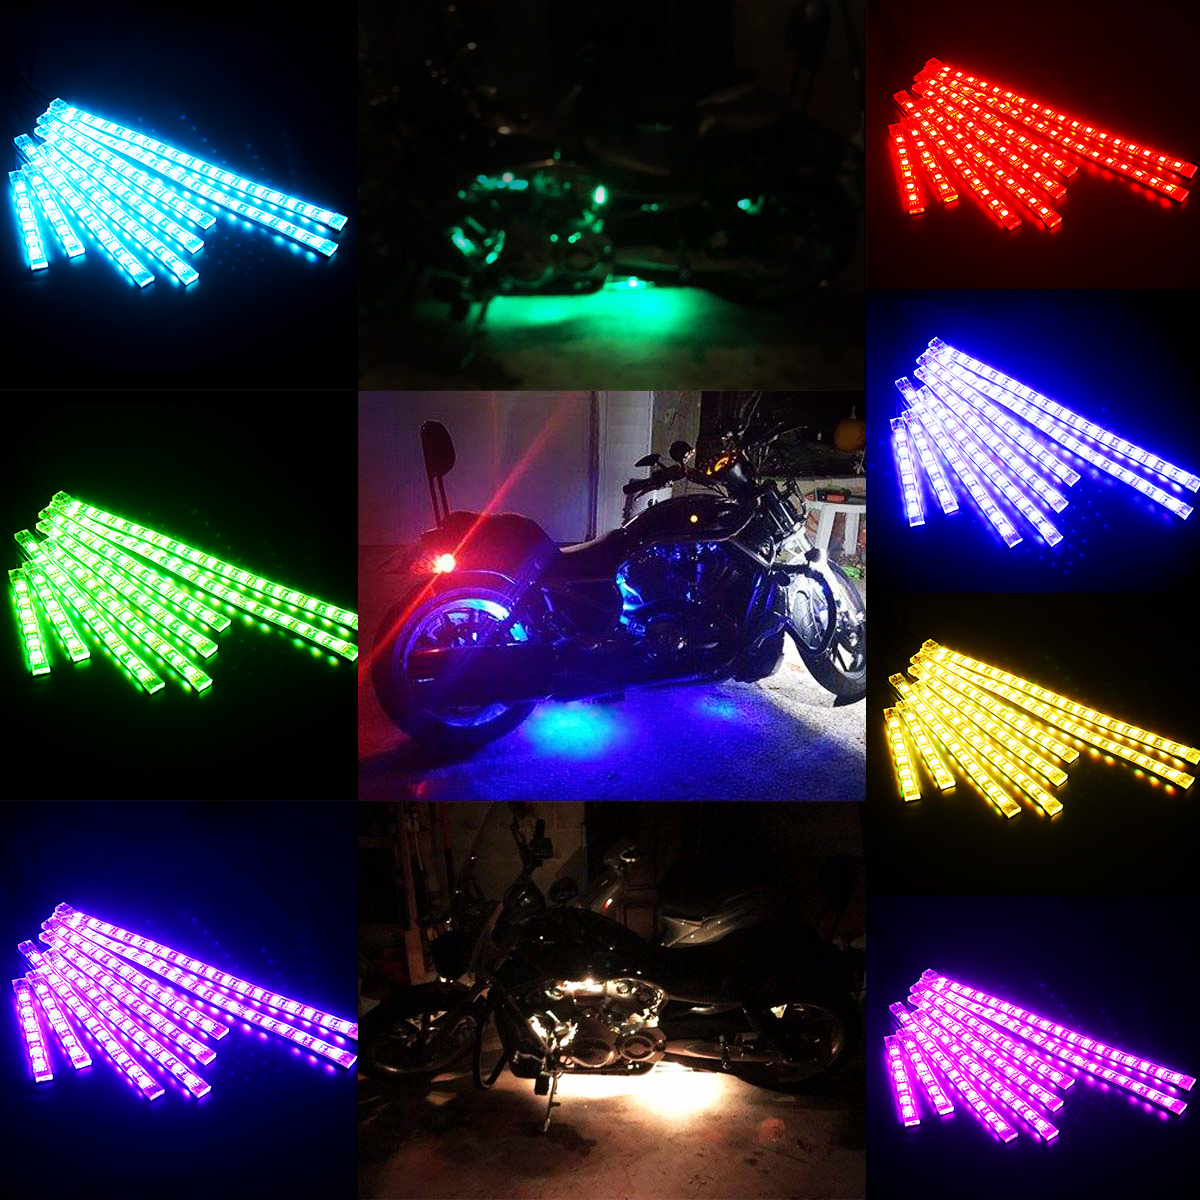 AMBOTHER 8Pcs Motorcycle LED Light Kits Strips DC 12-Volt Waterproof RGB Multi-Color Underglow Neon Ground Effect Atmosphere Lights with Remote and Adhesives Clips